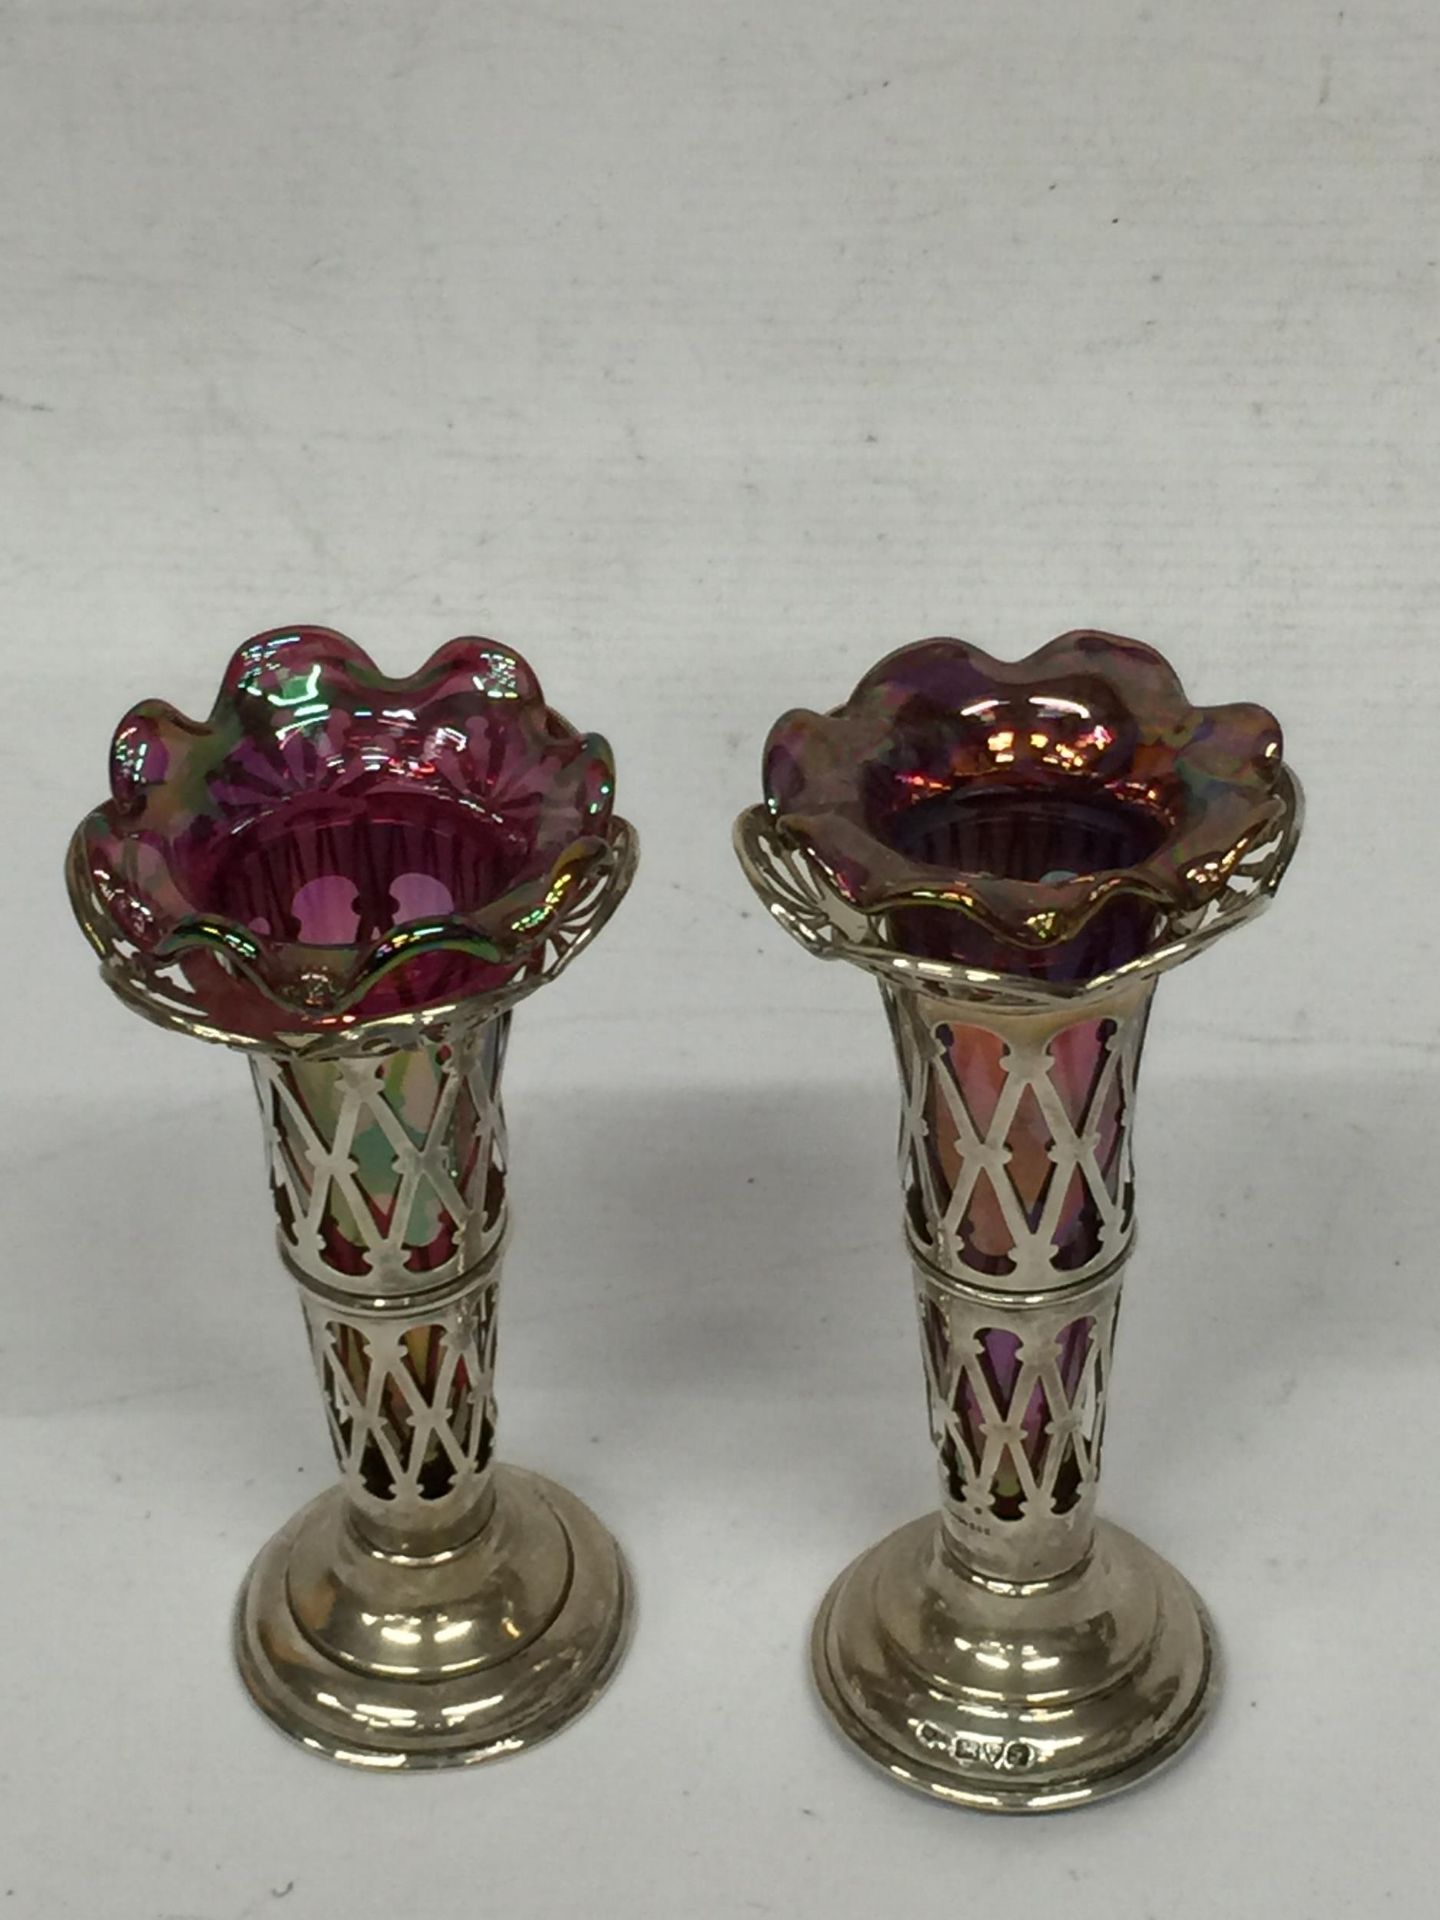 A PAIR OF CHESTER HALLMARKED SILVER BUD VASES WITH PINK LUSTRE EFFECT GLASS LINERS - Image 2 of 4